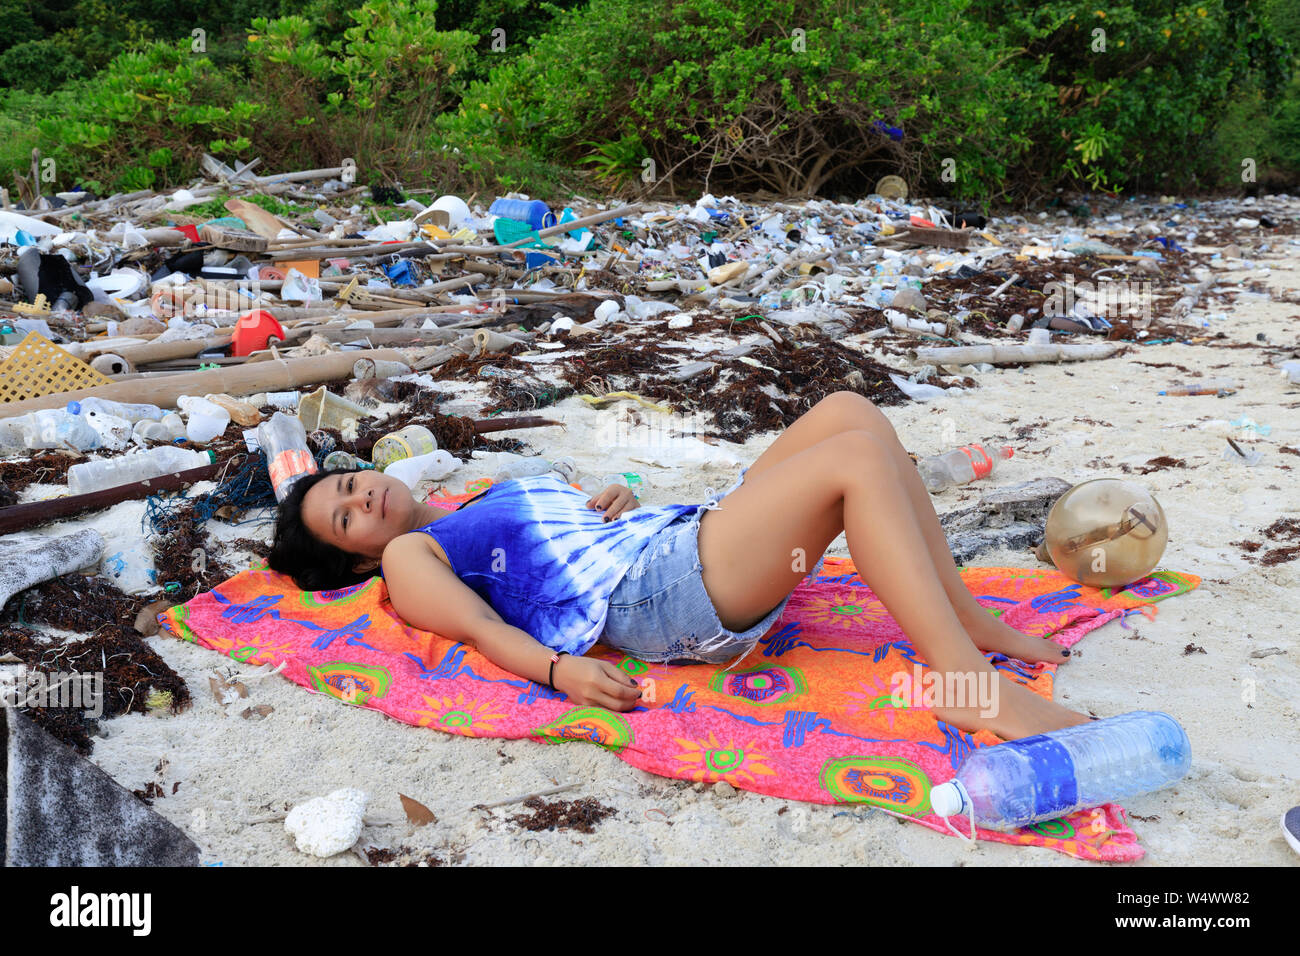 Woman relaxing on a beach very polluted by plastic pollution, Thailand Stock Photo